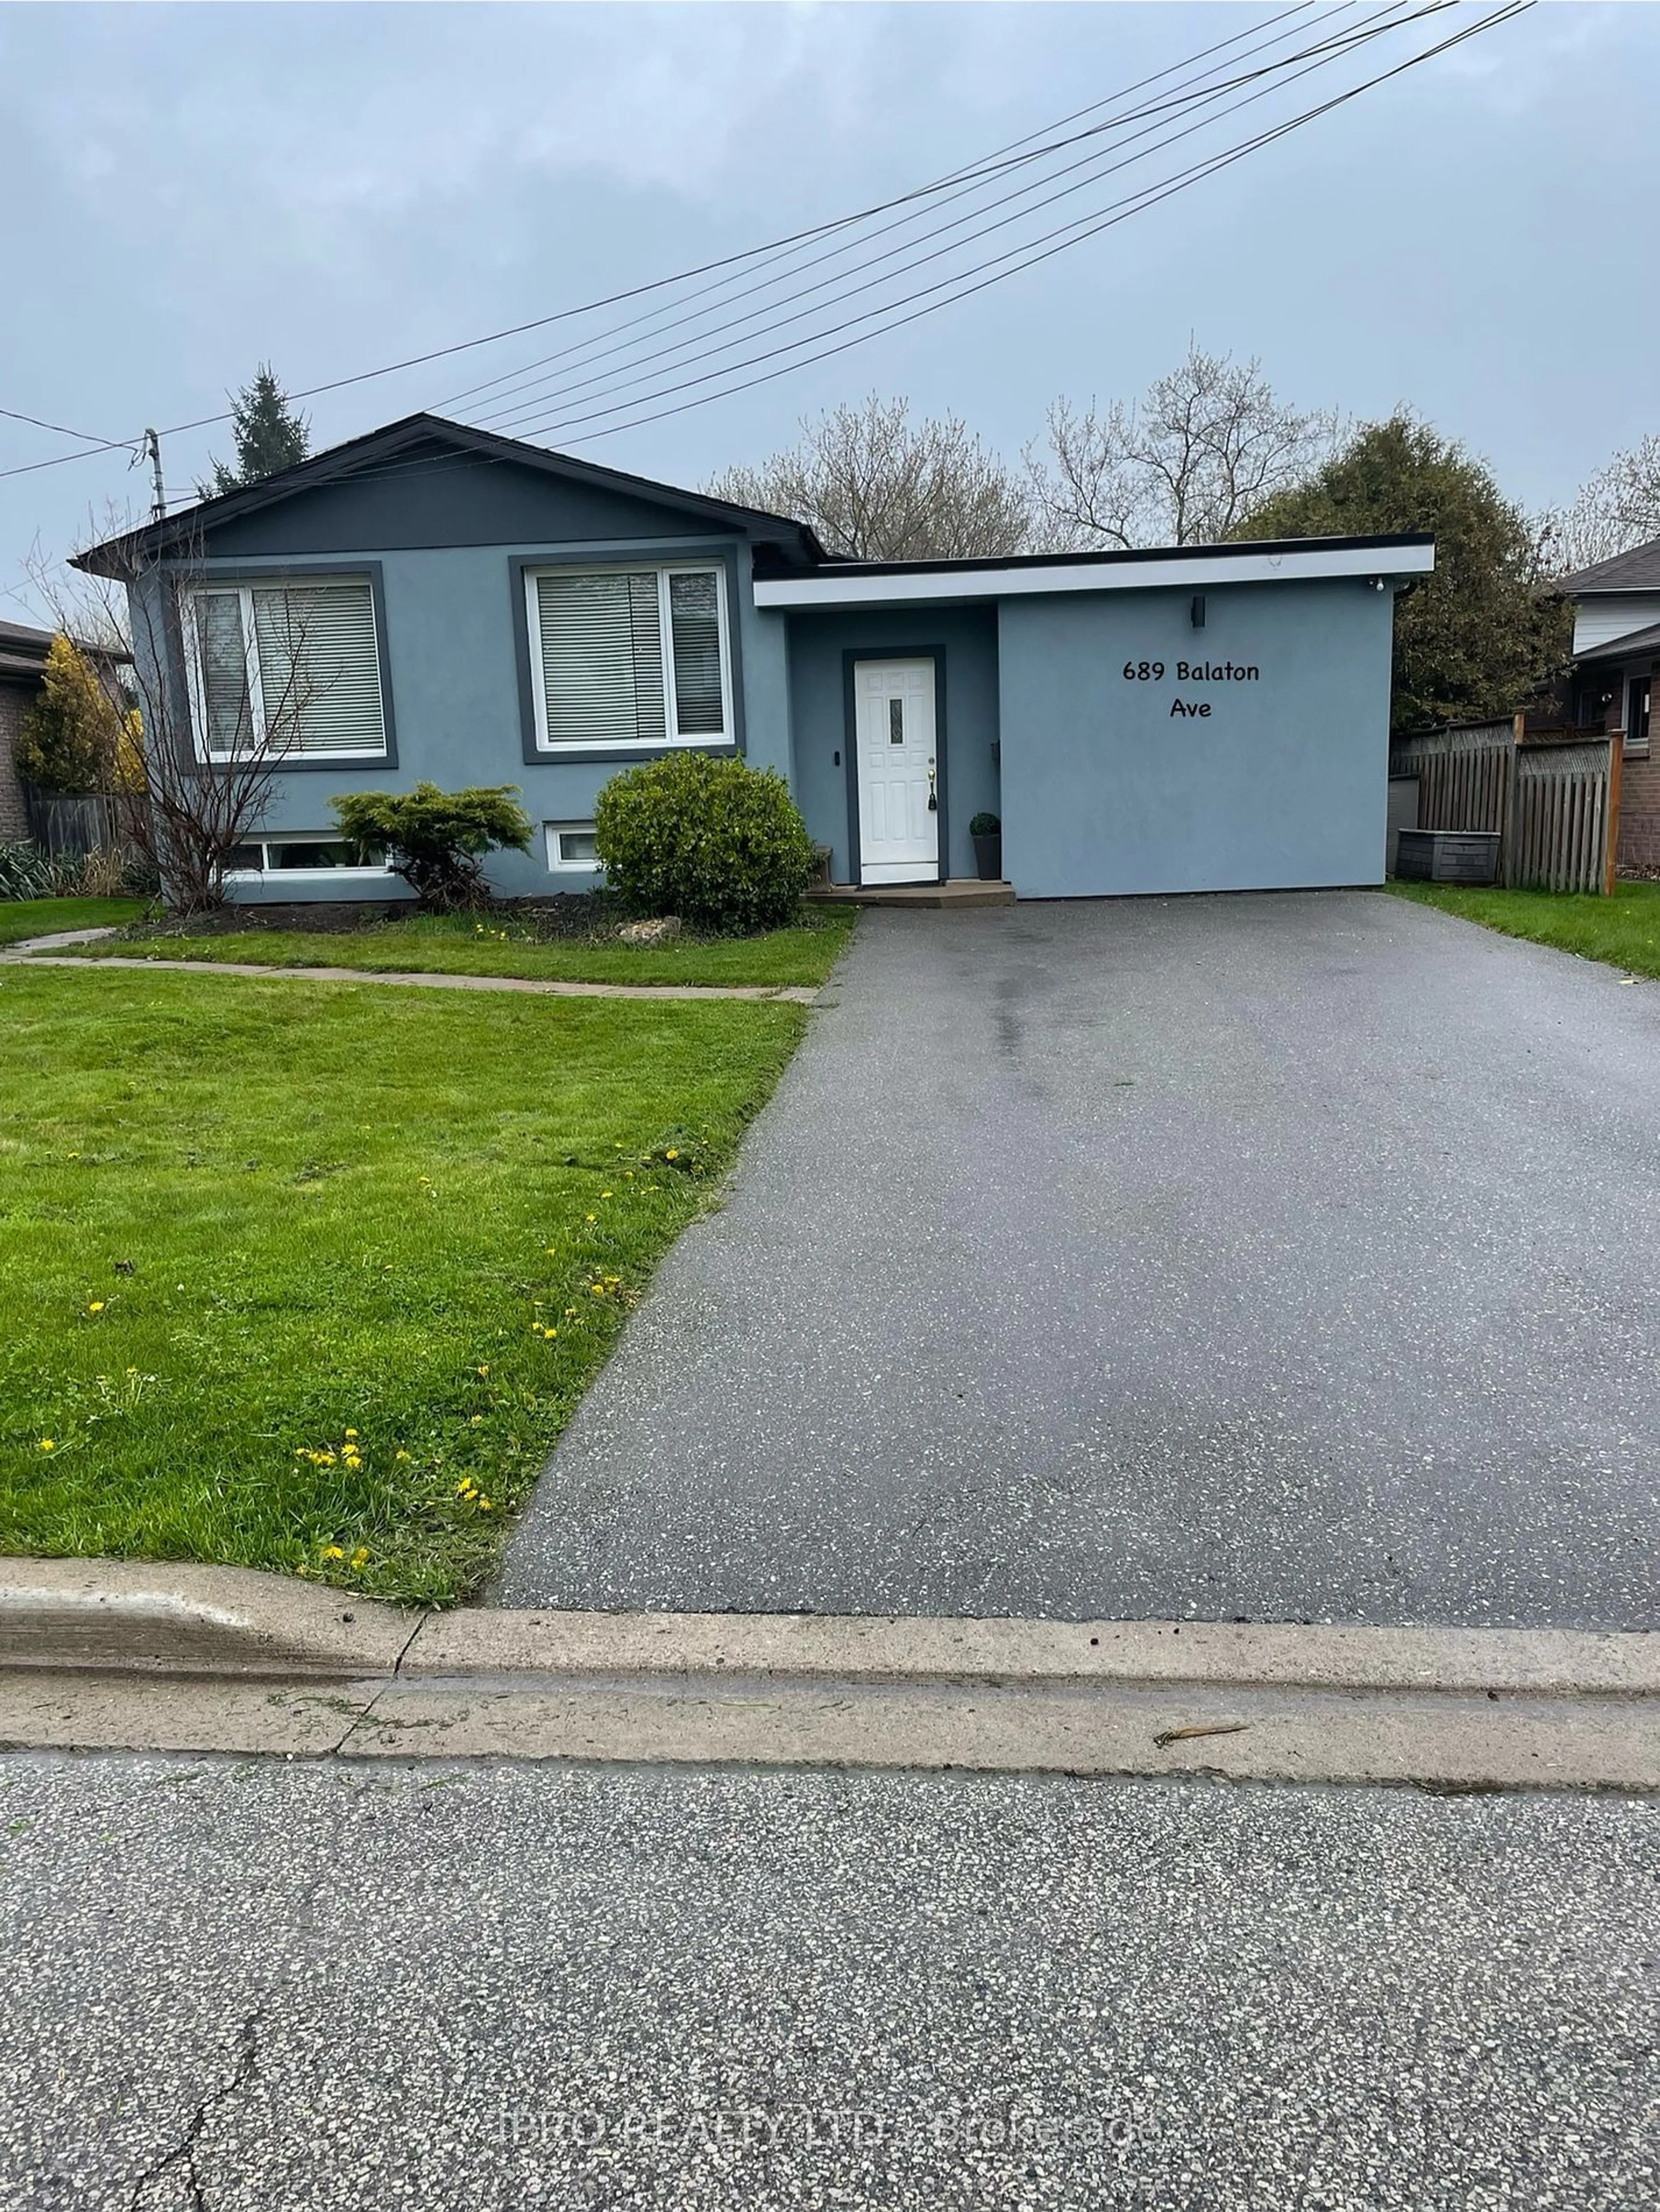 Frontside or backside of a home for 689 Balaton Ave, Pickering Ontario L1W 1W2